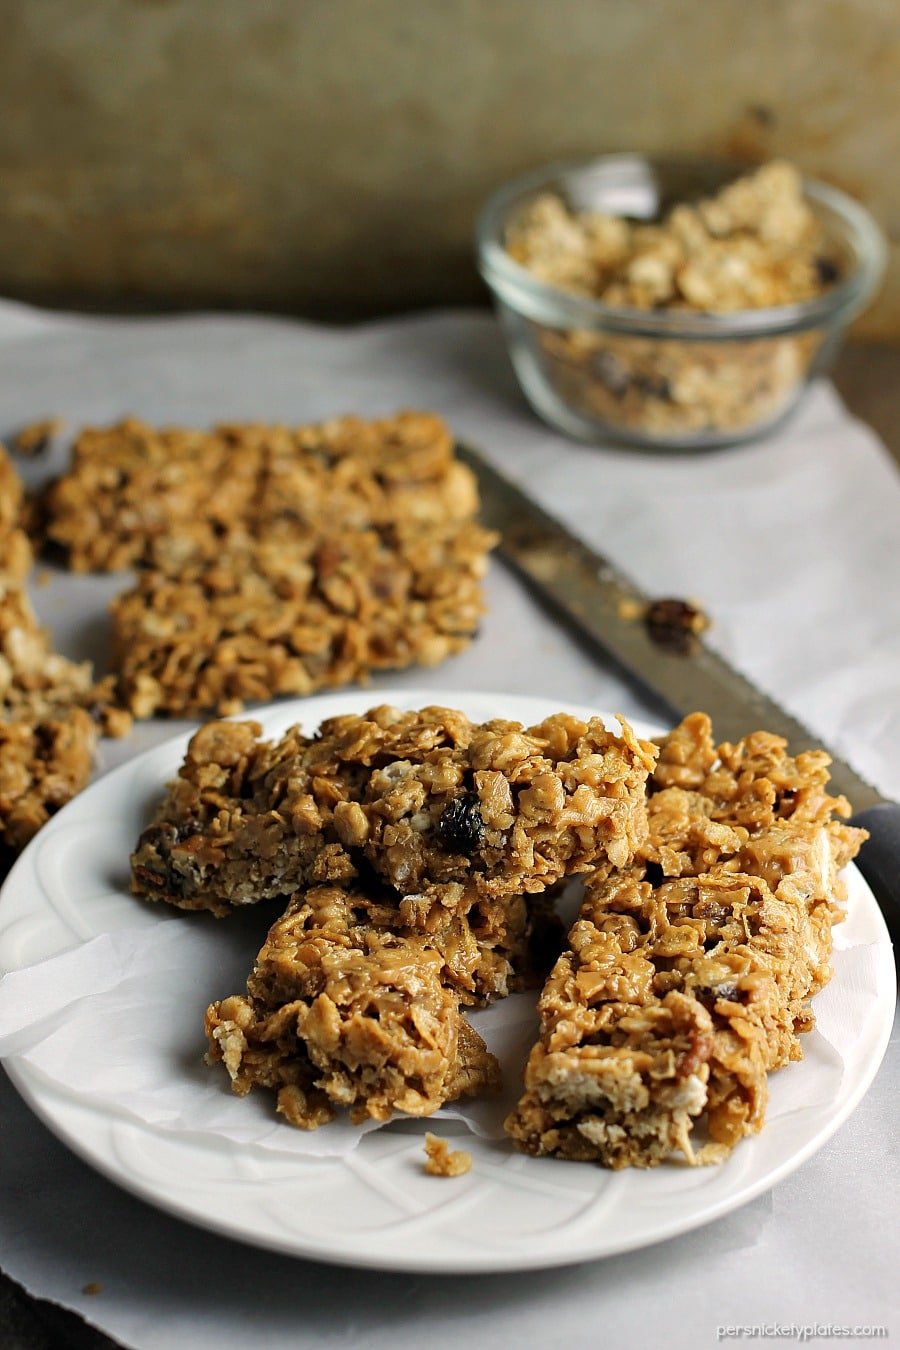 No Bake Chewy Granola Bars filled with peanut butter, honey, raisins, dates, and pecans are a healthy start to your day. With only five ingredients, you can whip them up in no time! | www.persnicketyplates.com